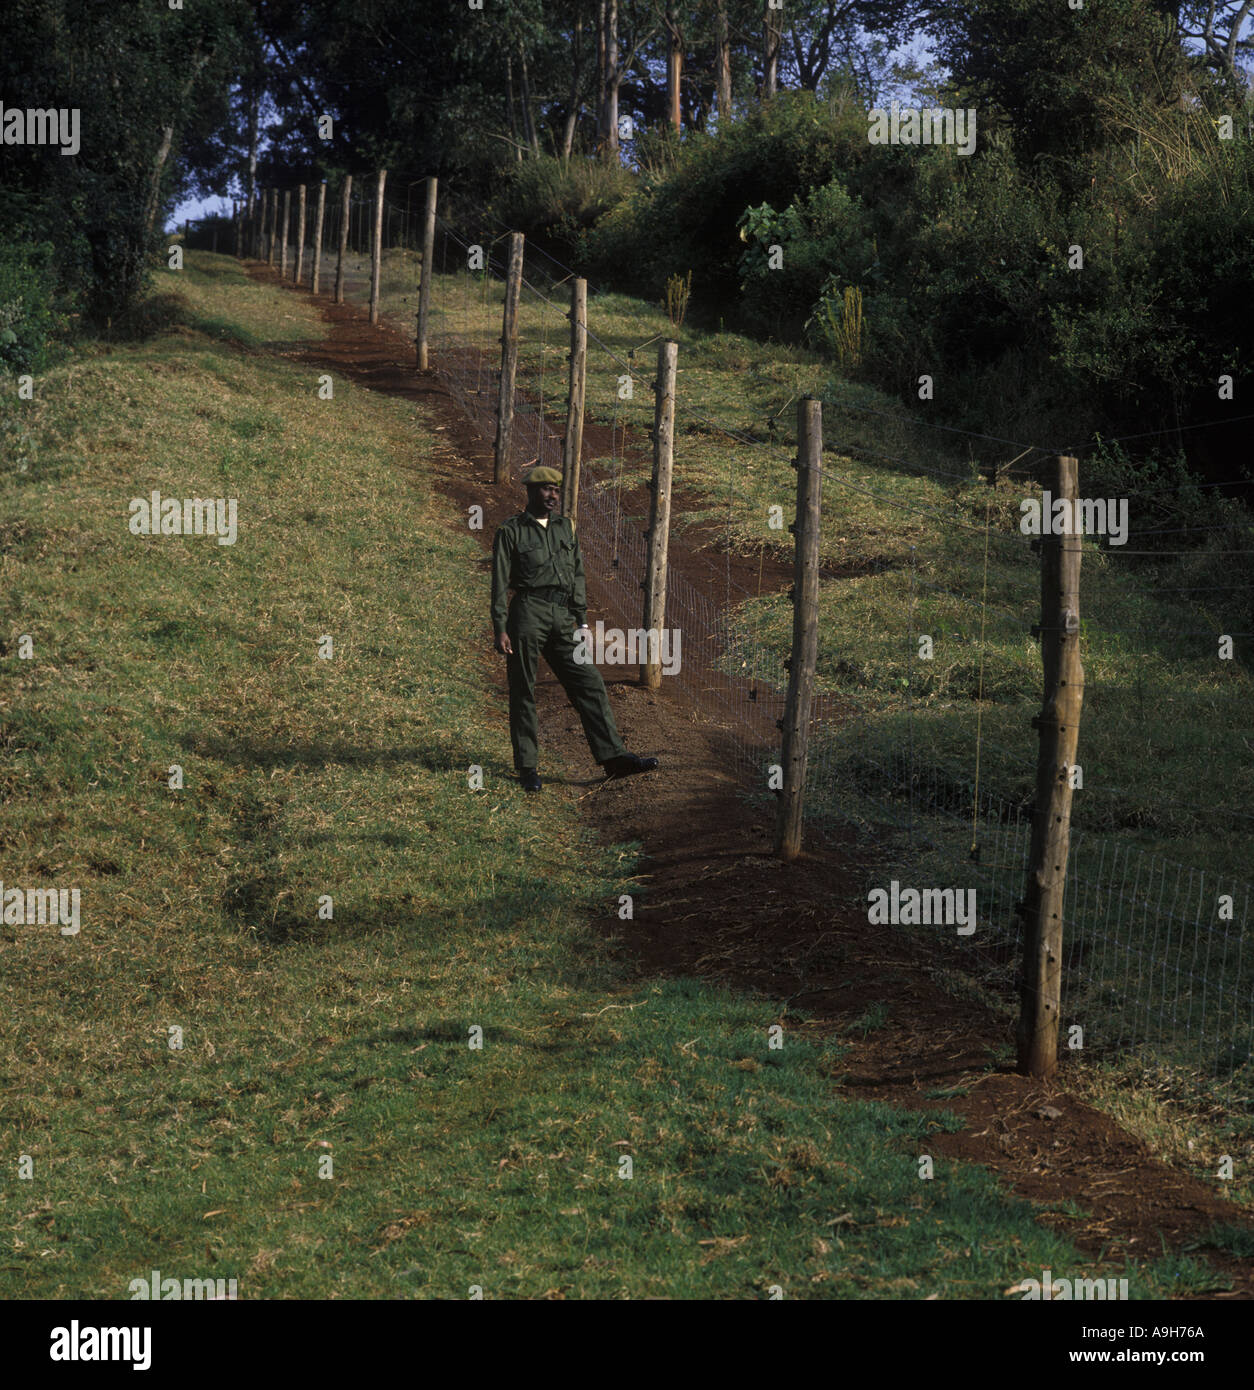 Reserves Game warden standing by new electric fence Aberdare National Park Kenya Stock Photo